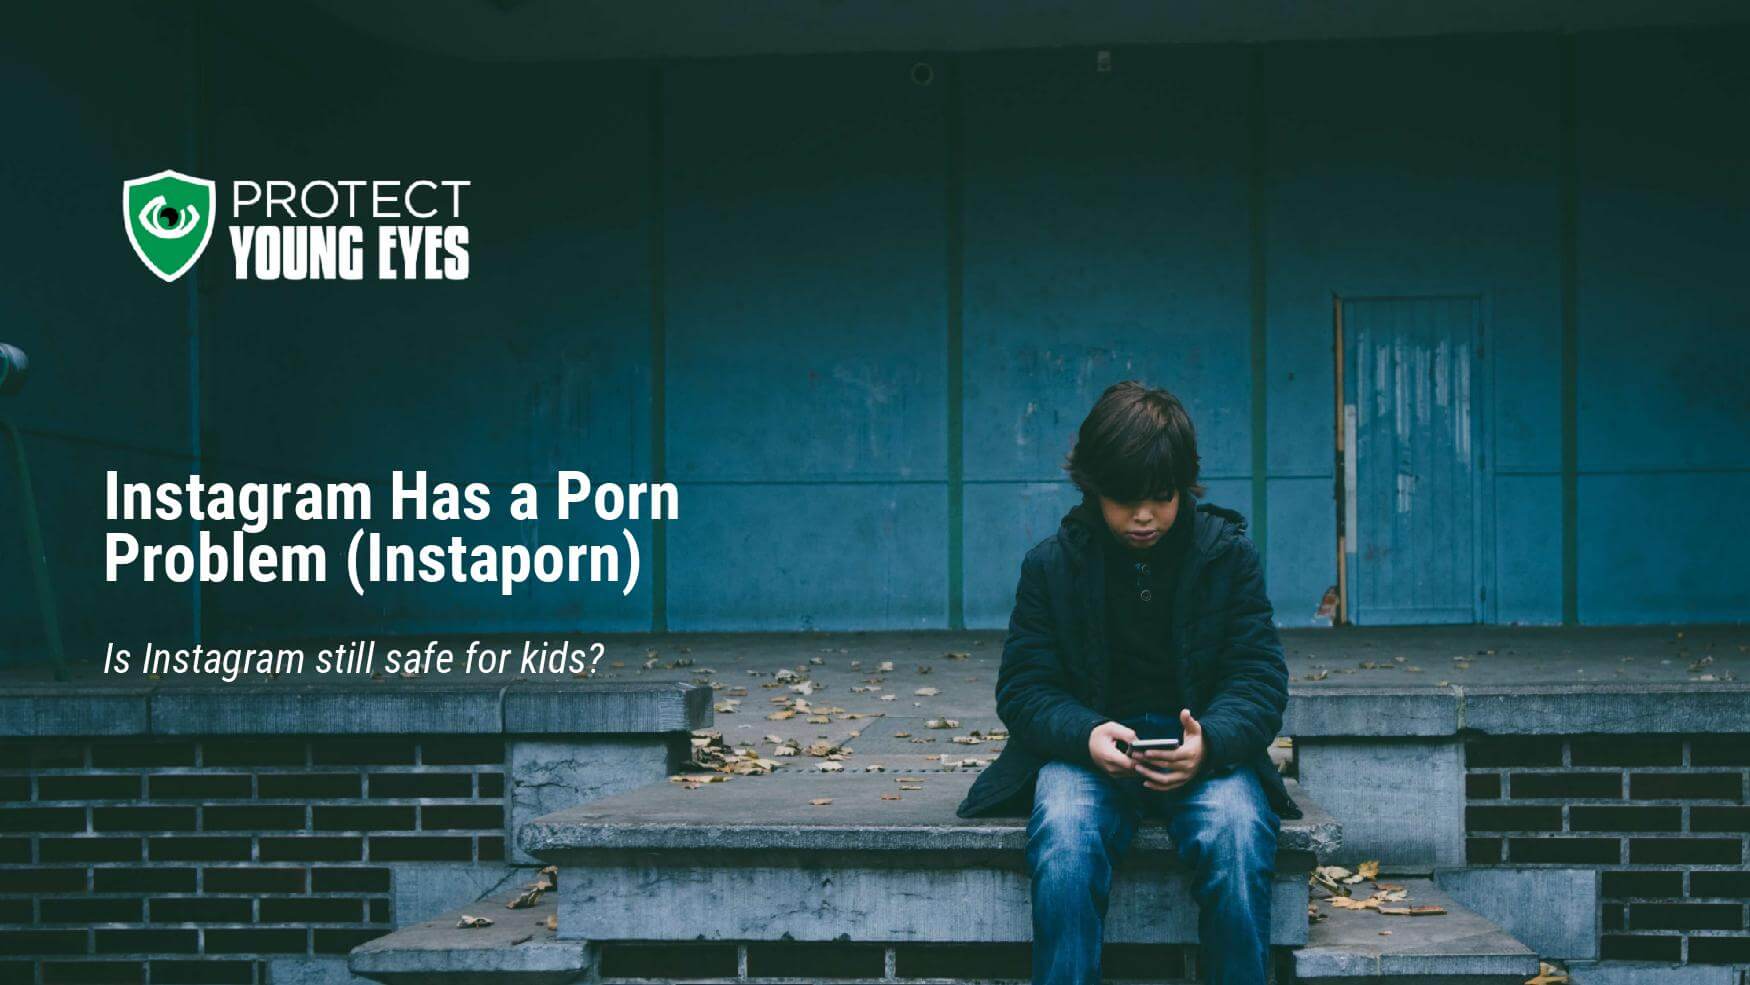 Instagram has a Pornography Problem - Protect Young Eyes Blog